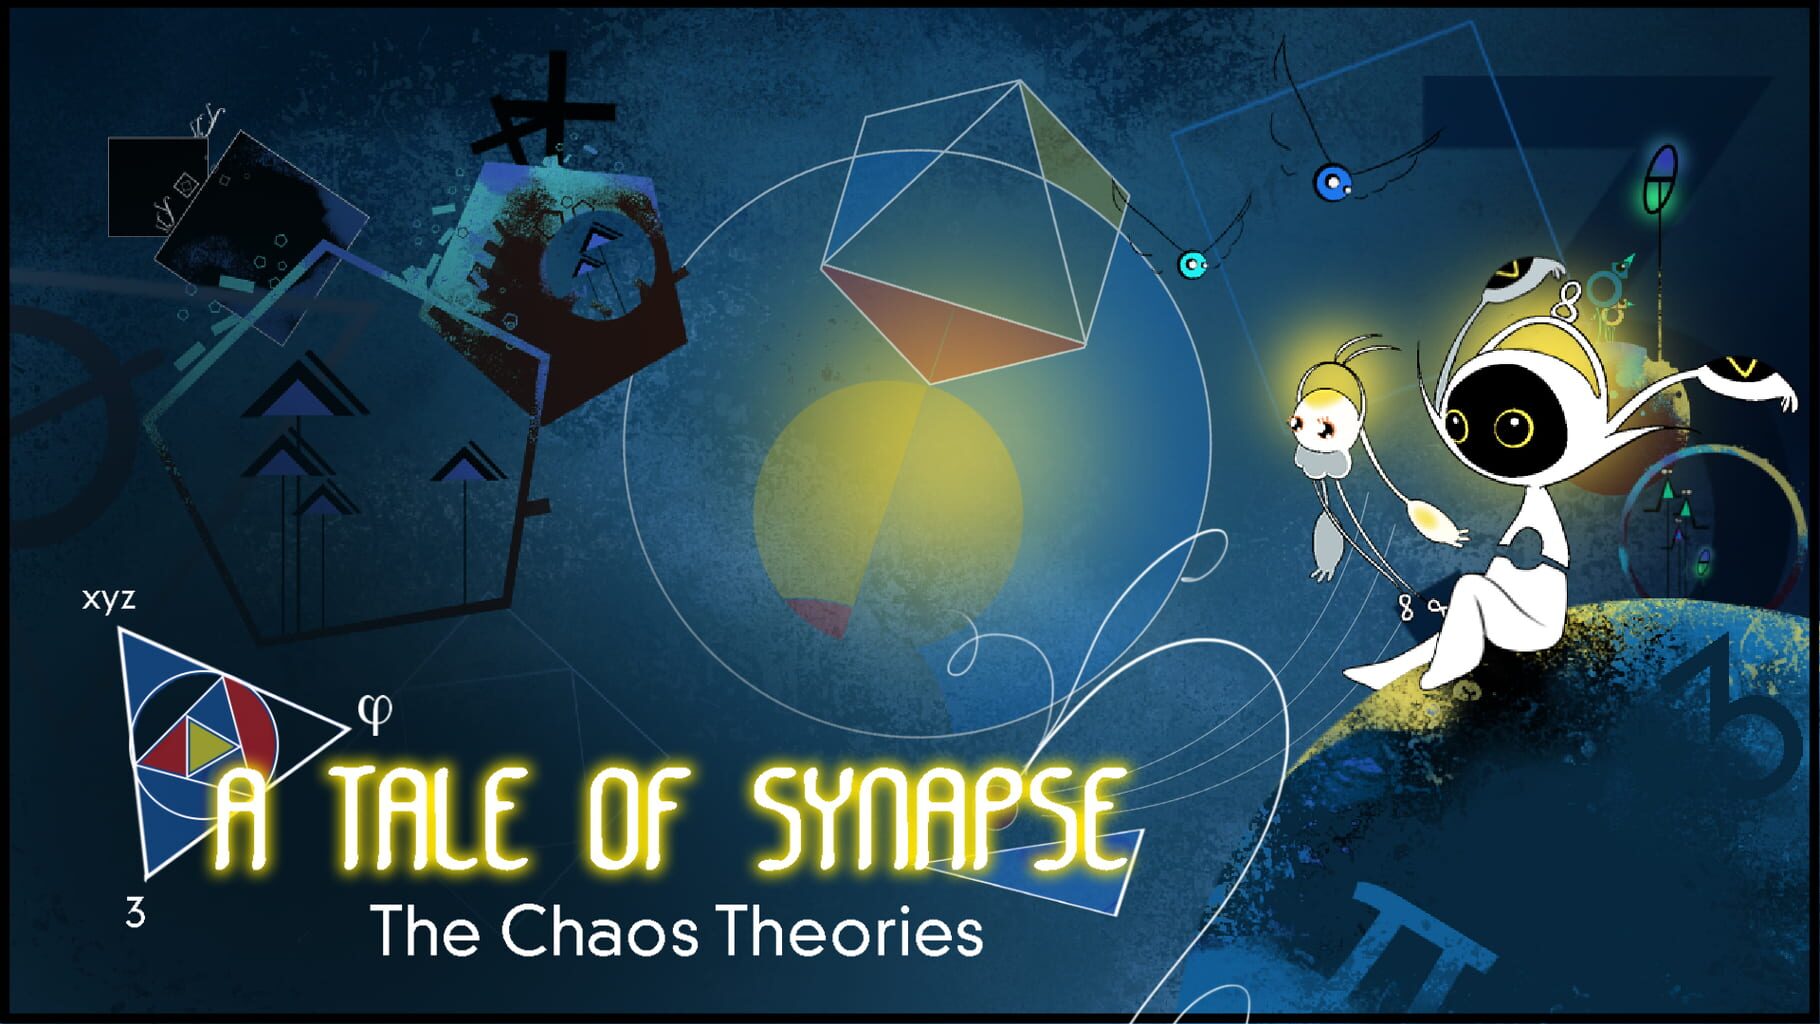 A Tale of Synapse: The Chaos Theories artwork